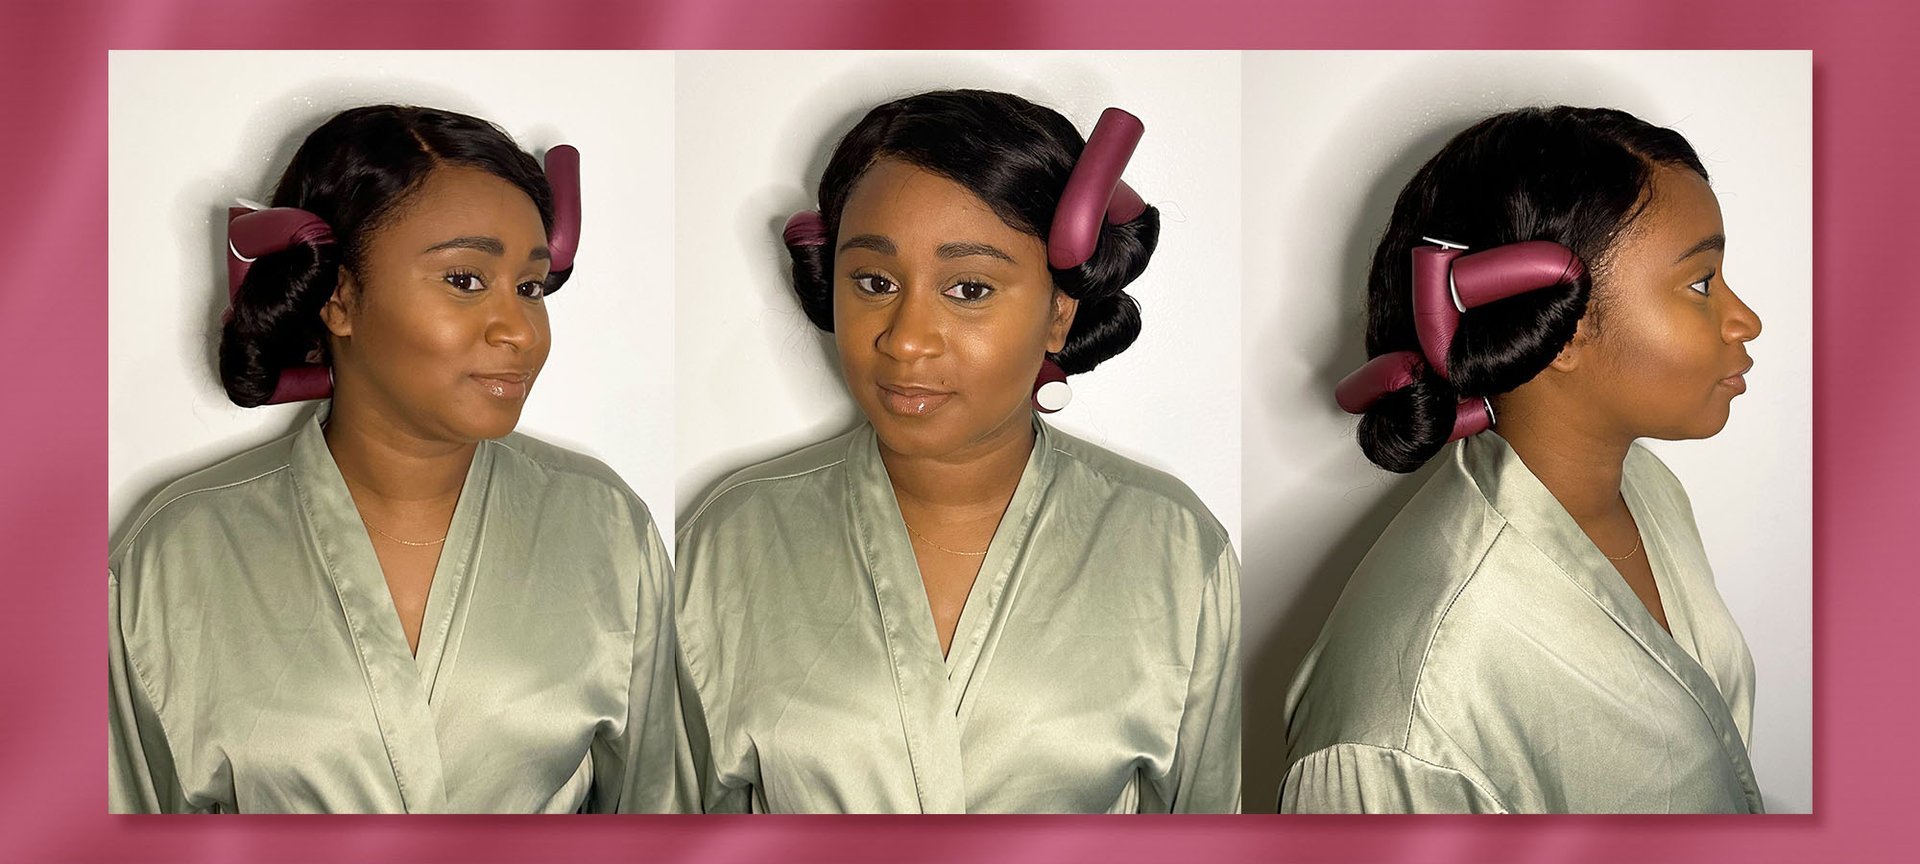 How to Use Hair Rollers to Curl Your Hair - L'Oréal Paris